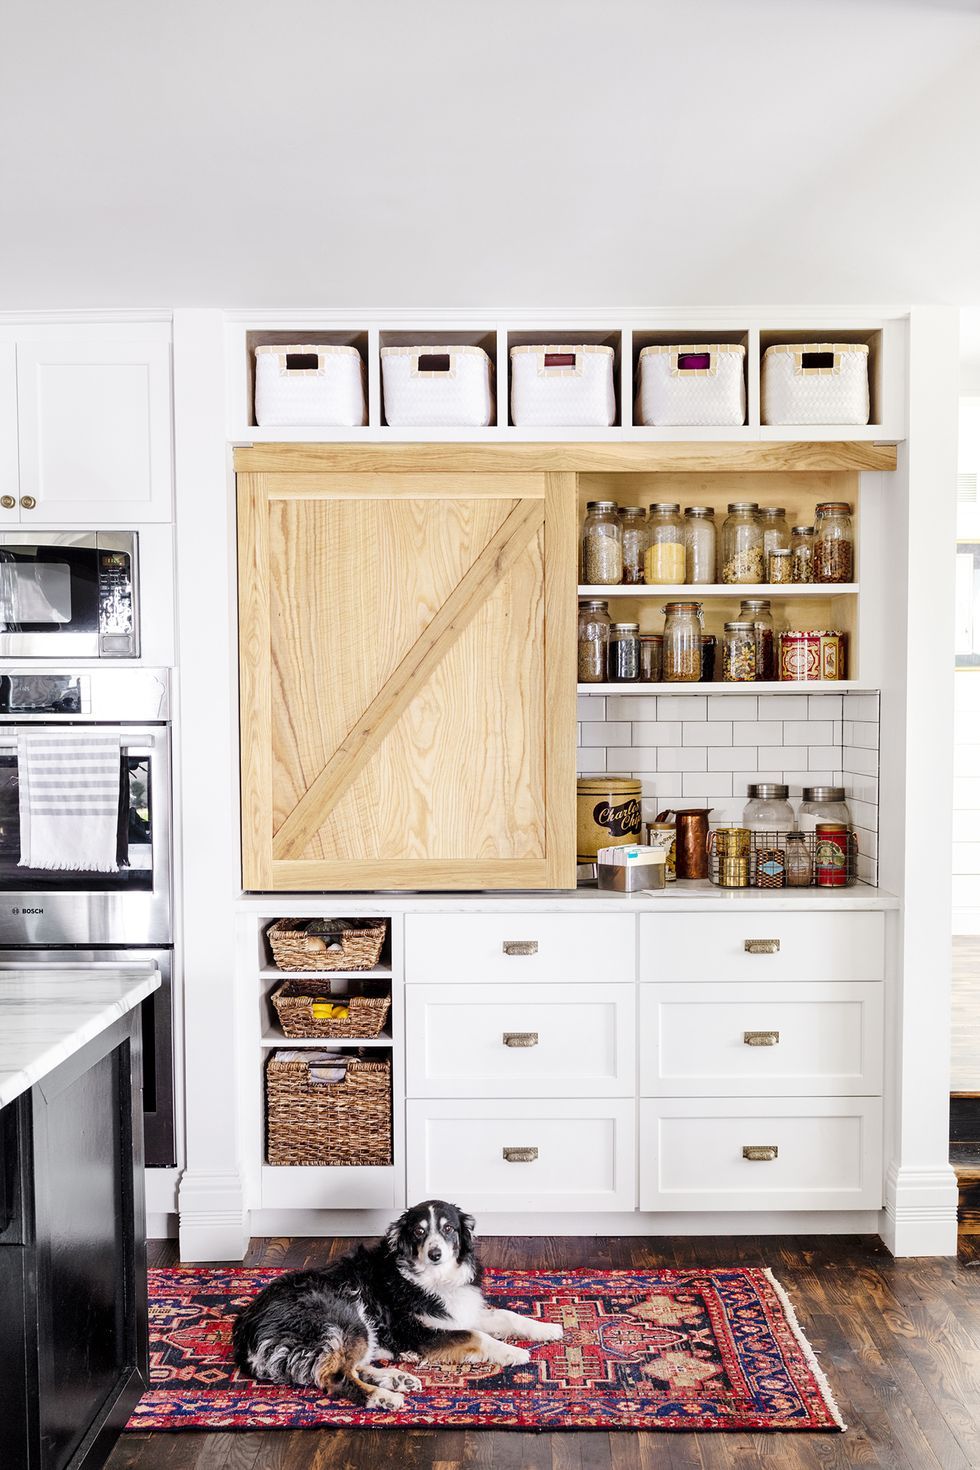 30 Kitchen Organization Ideas, How To Organise A Very Small Kitchen